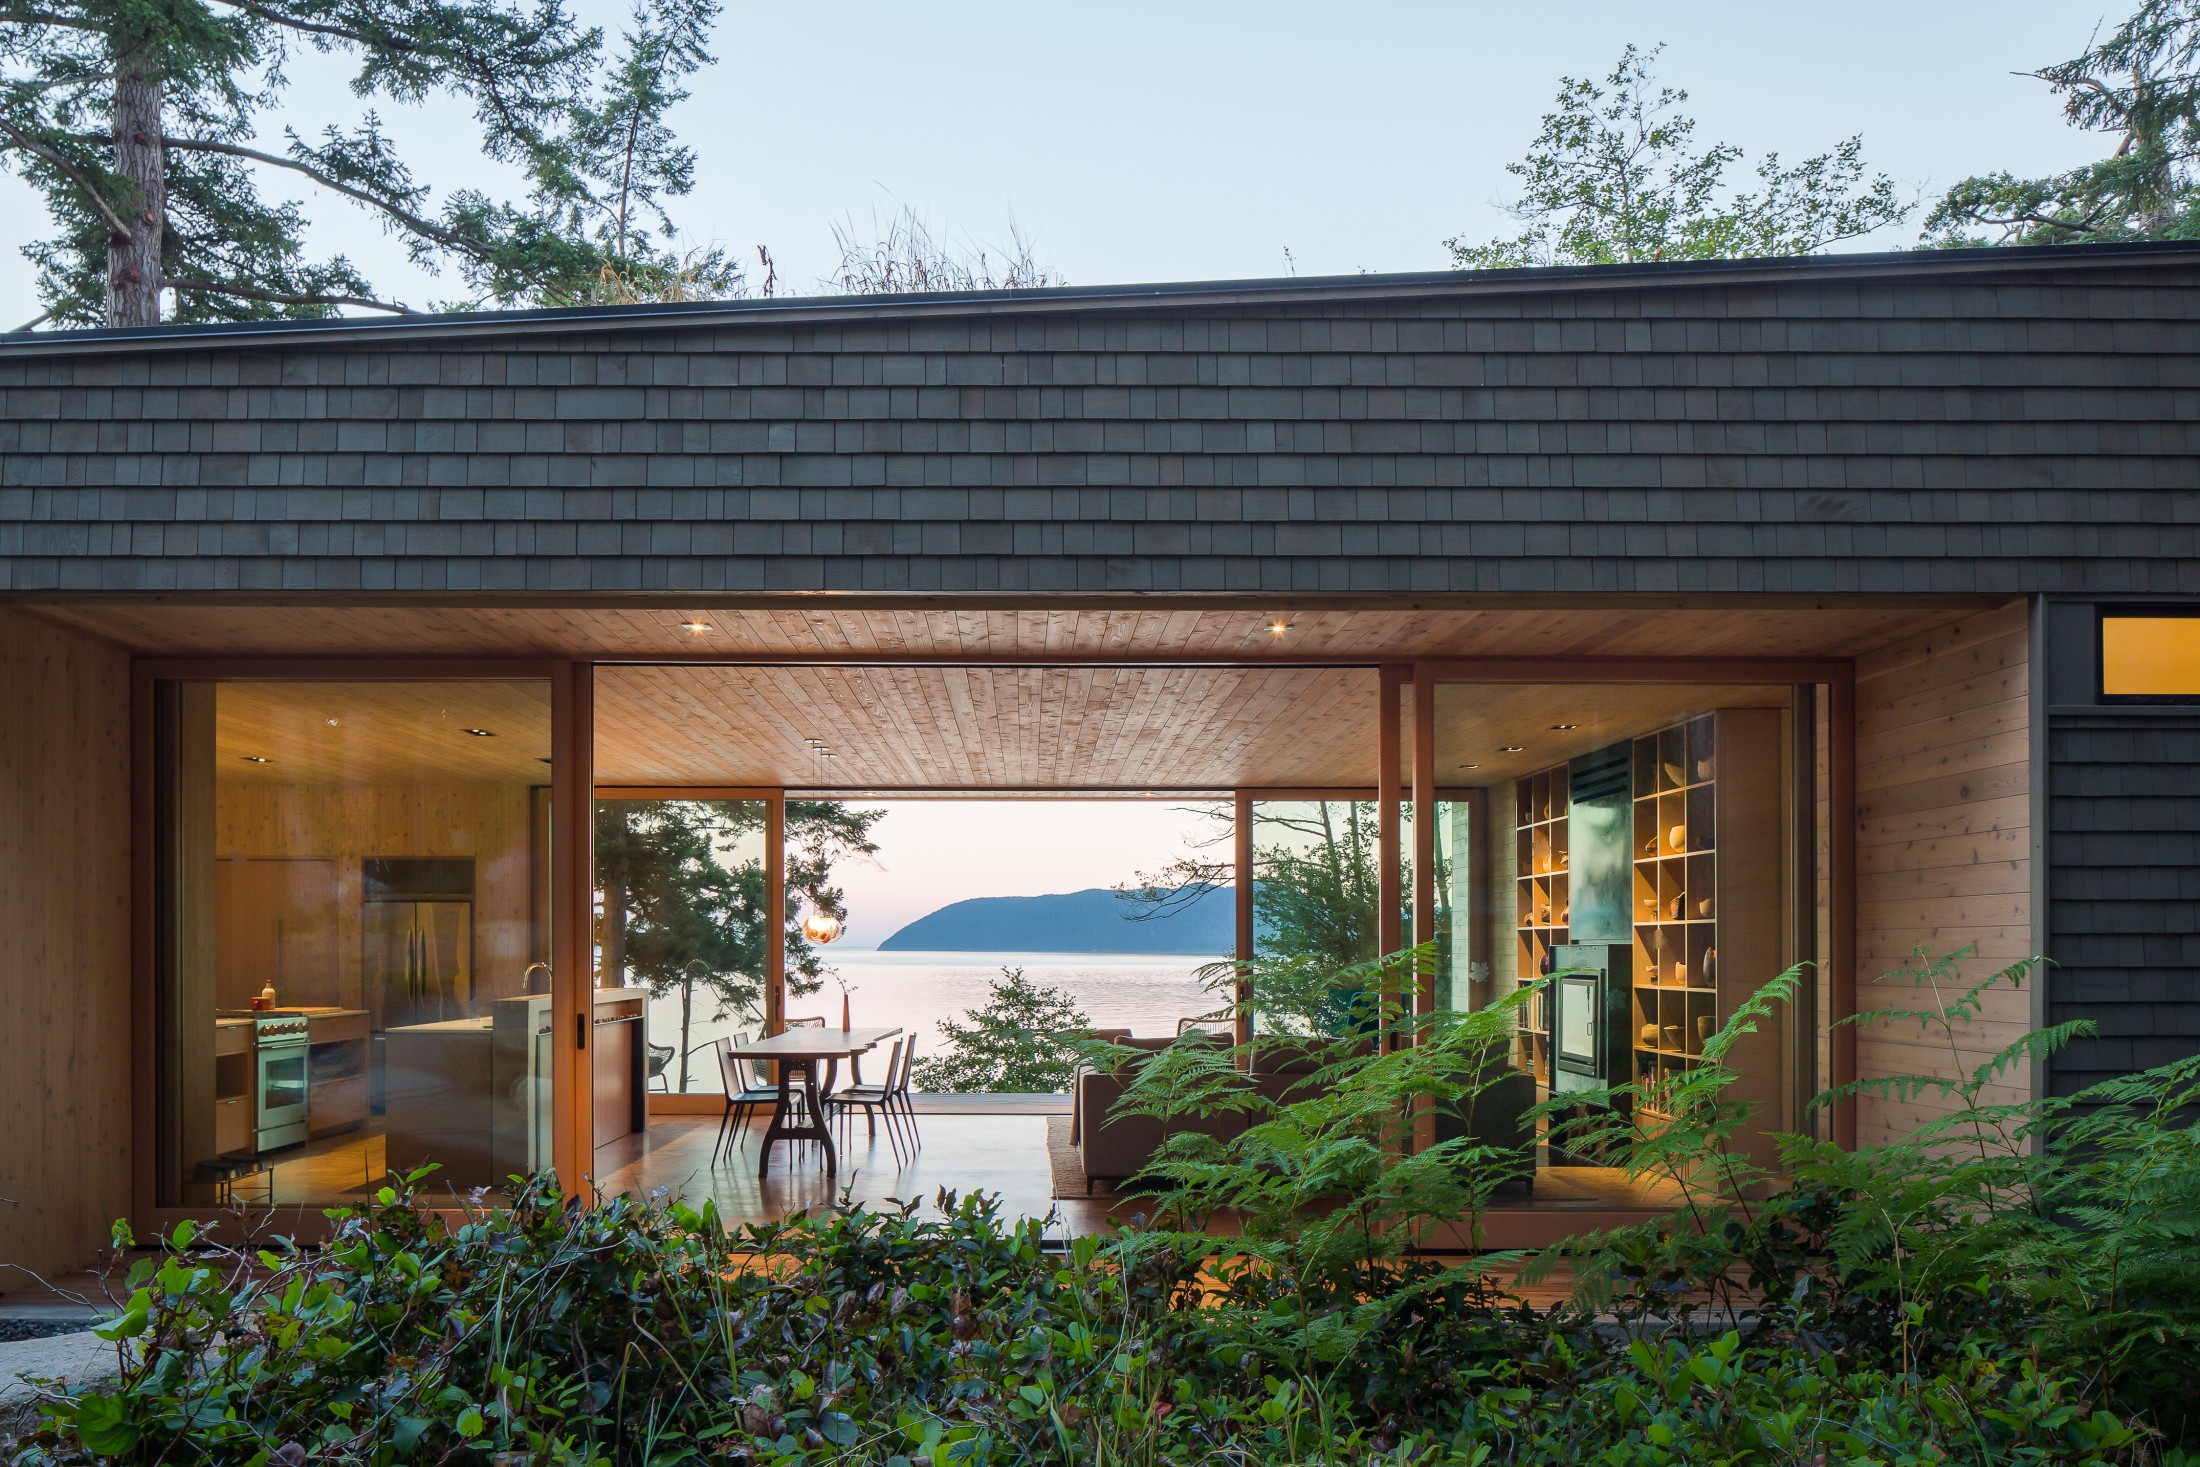 Only slightly lower in latitude, the Lone Madrone by Heliotrope also nestles itself in the rocks of the San Juan Islands. #coastalbackyard inspiration via www.L-2-Design.com